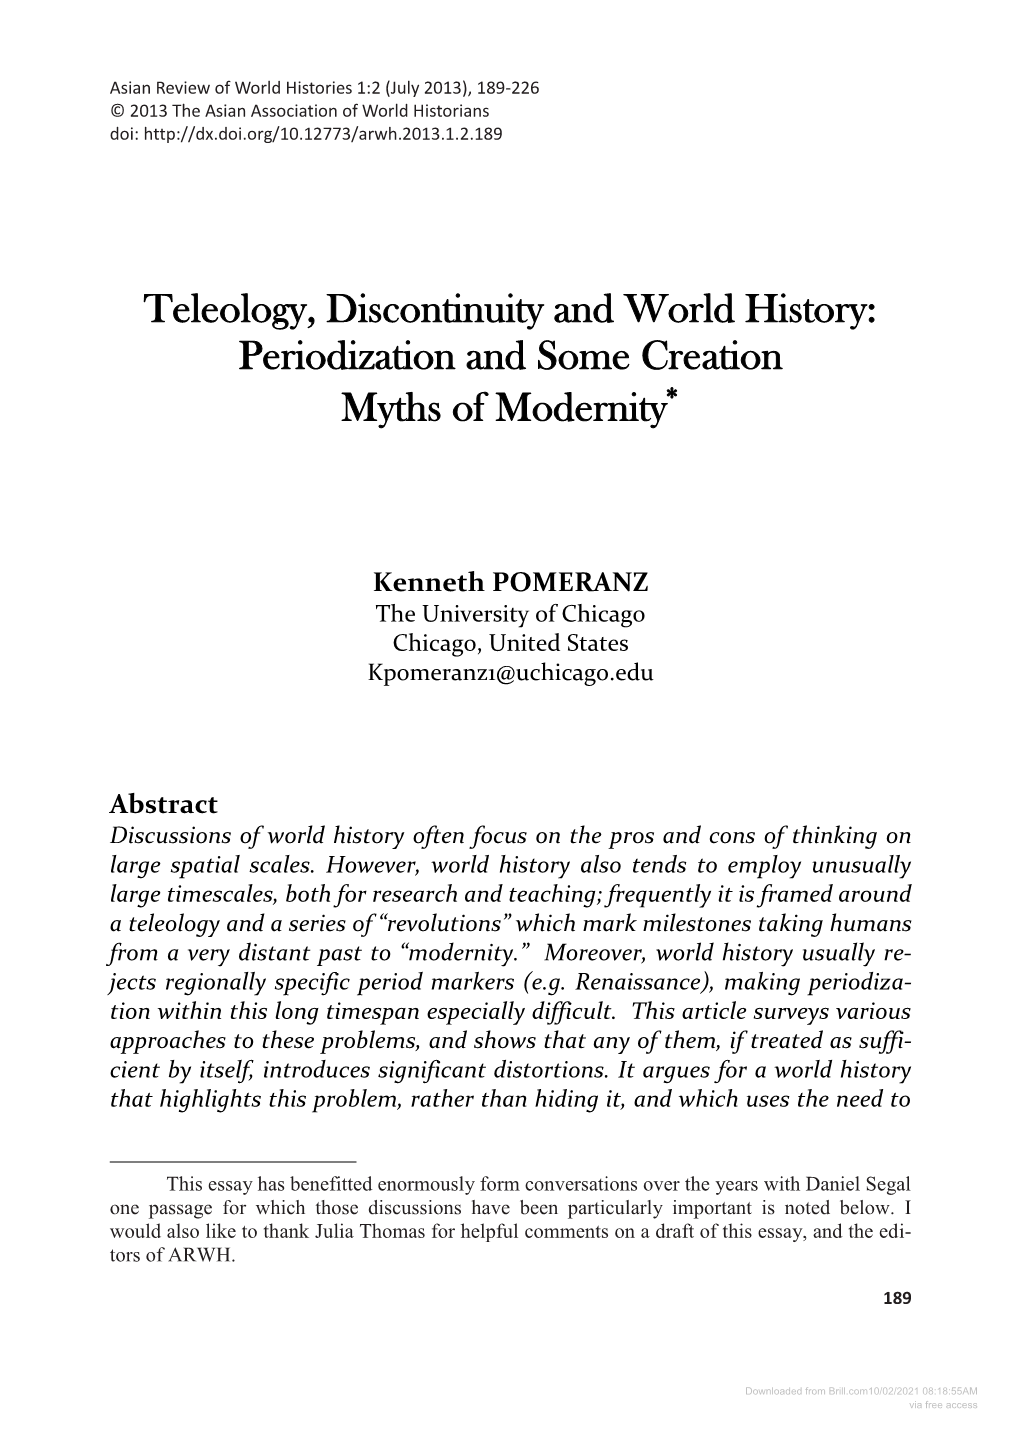 Periodization and Some Creation Myths of Modernity